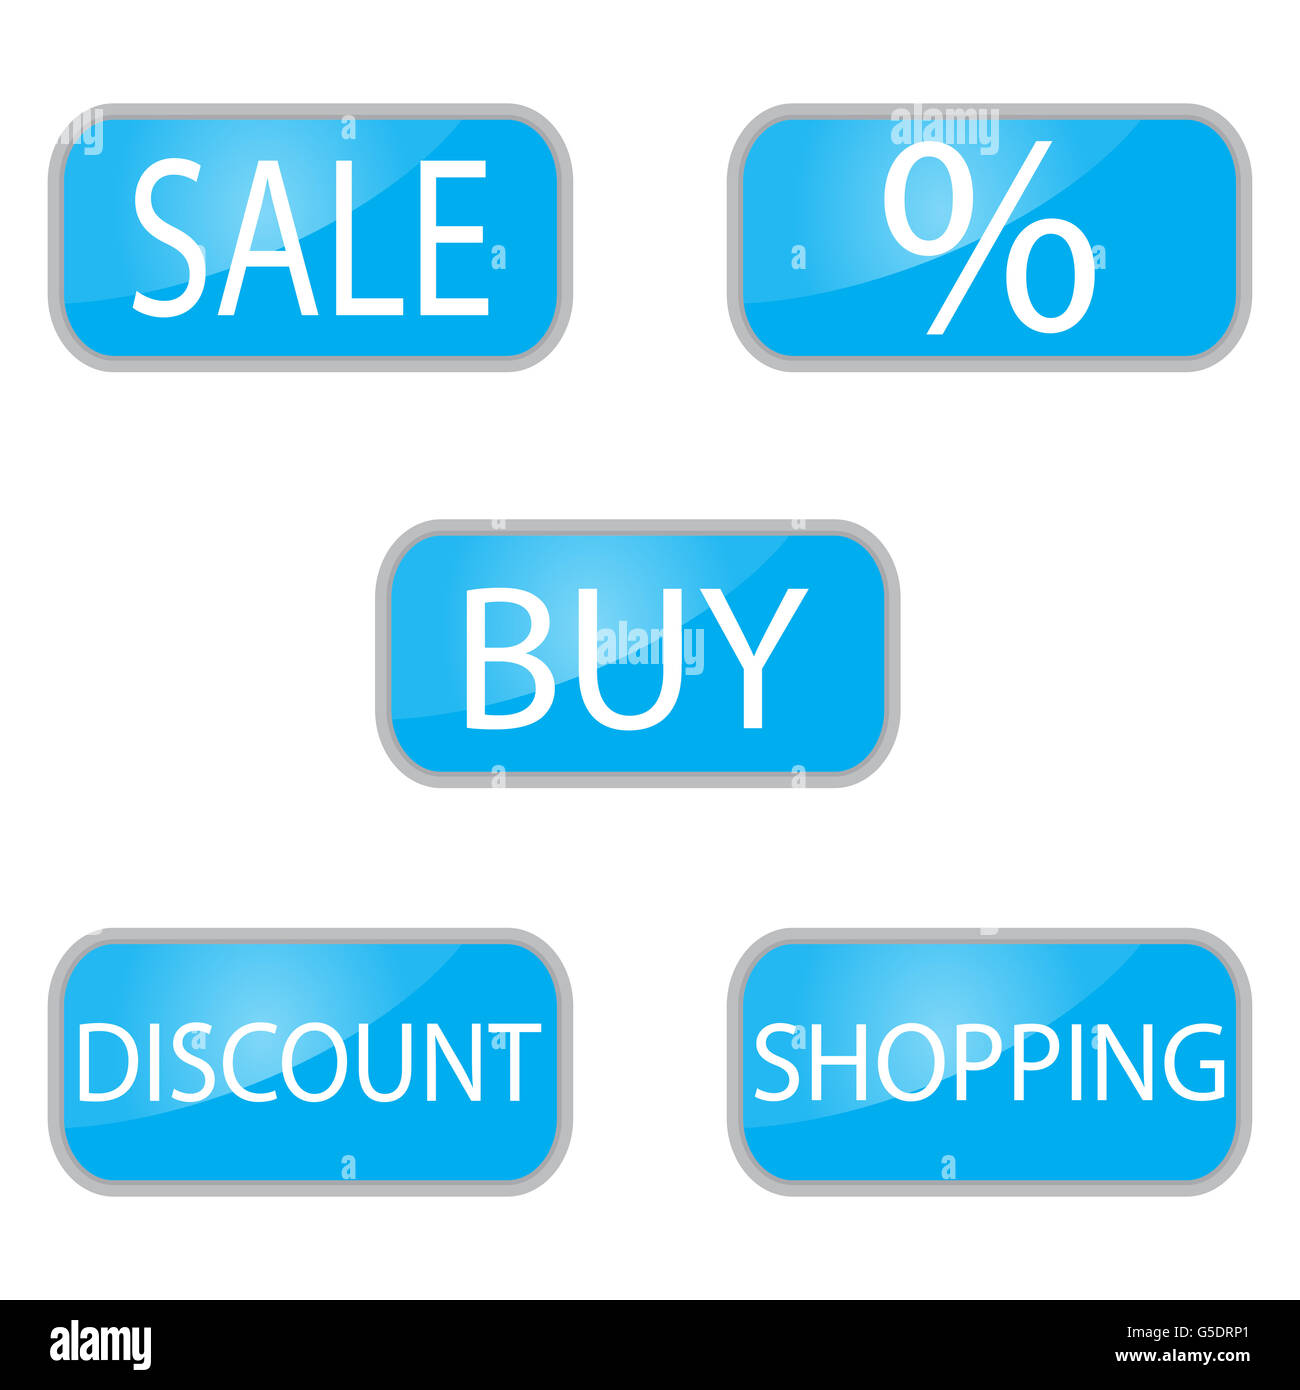 Web button for shooping and online shop. Discount and buy buttons. sale and shopping buttons. Vector illustration Stock Photo